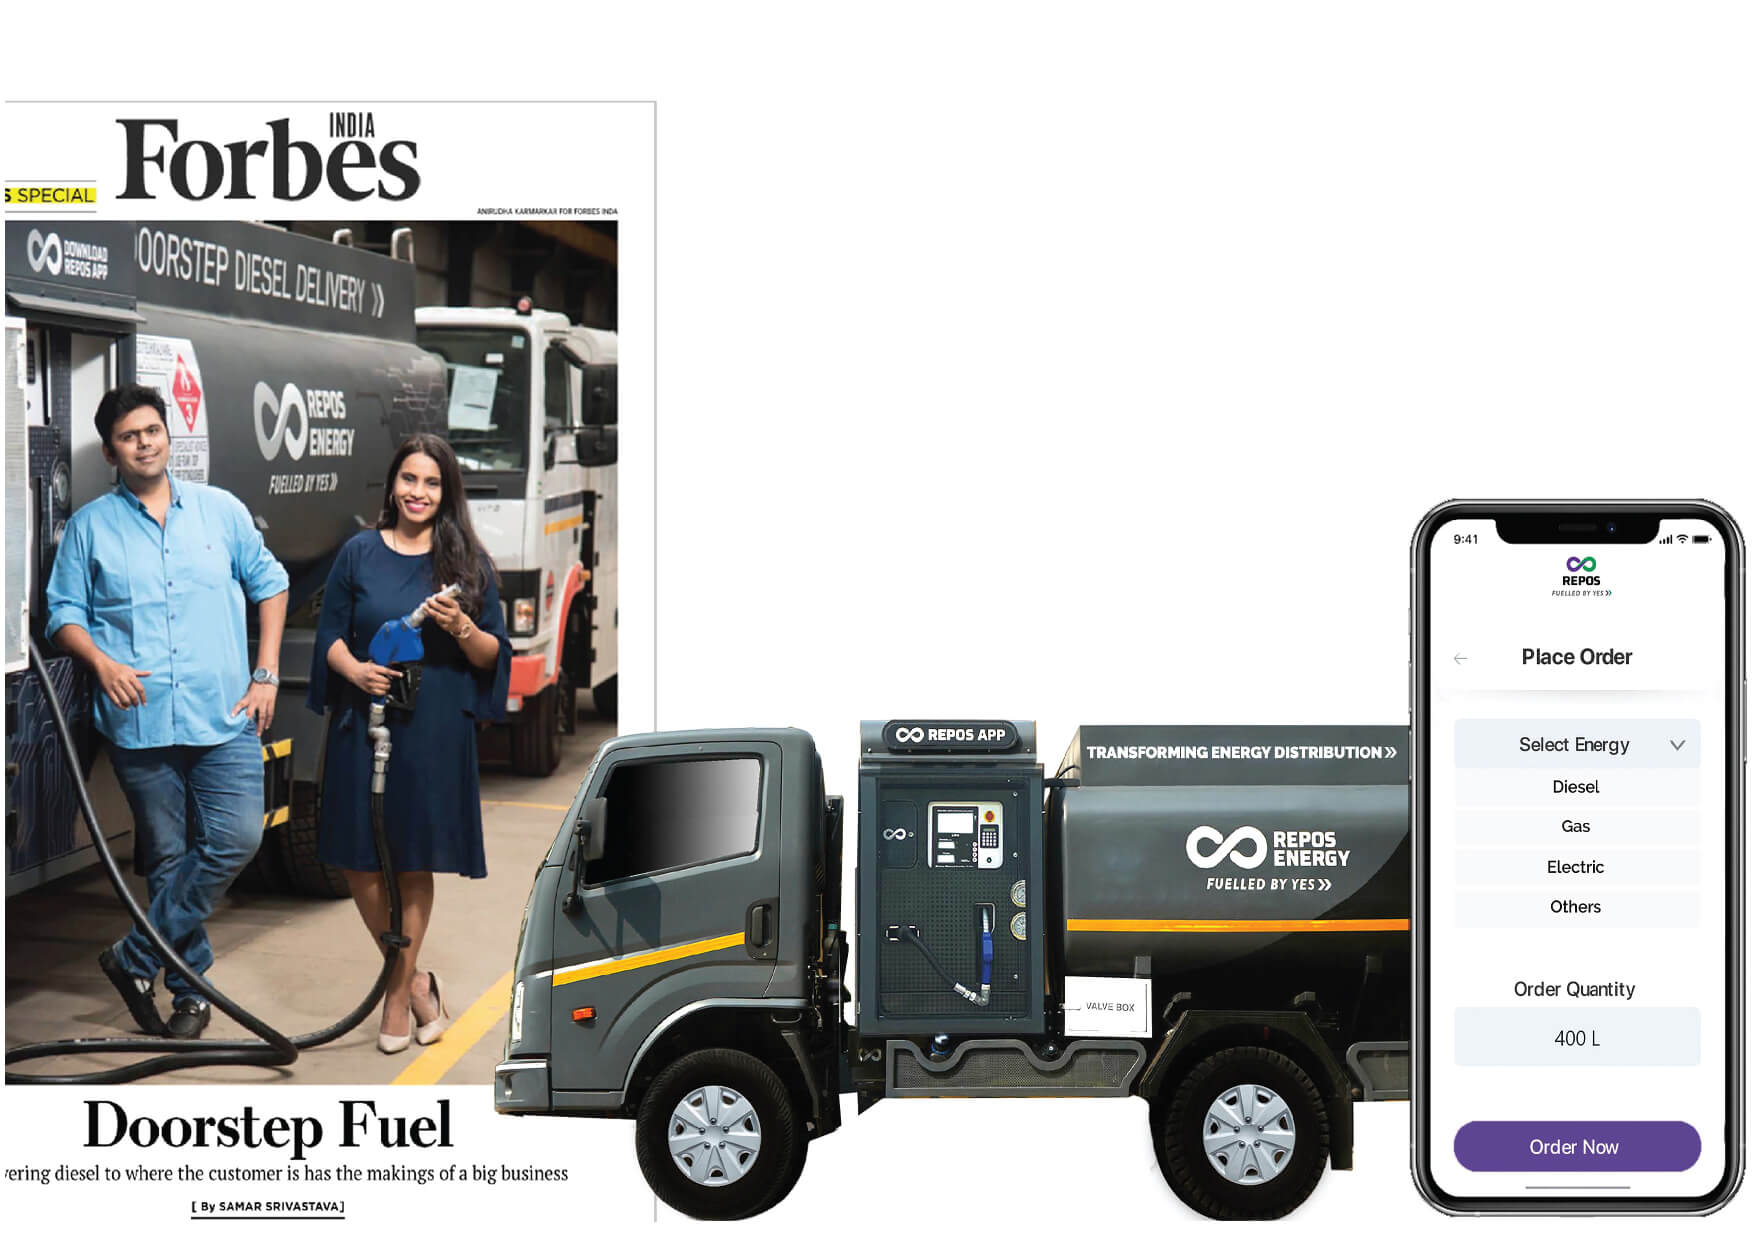 Our impact on the fuel distribution industry was covered by Forbes.